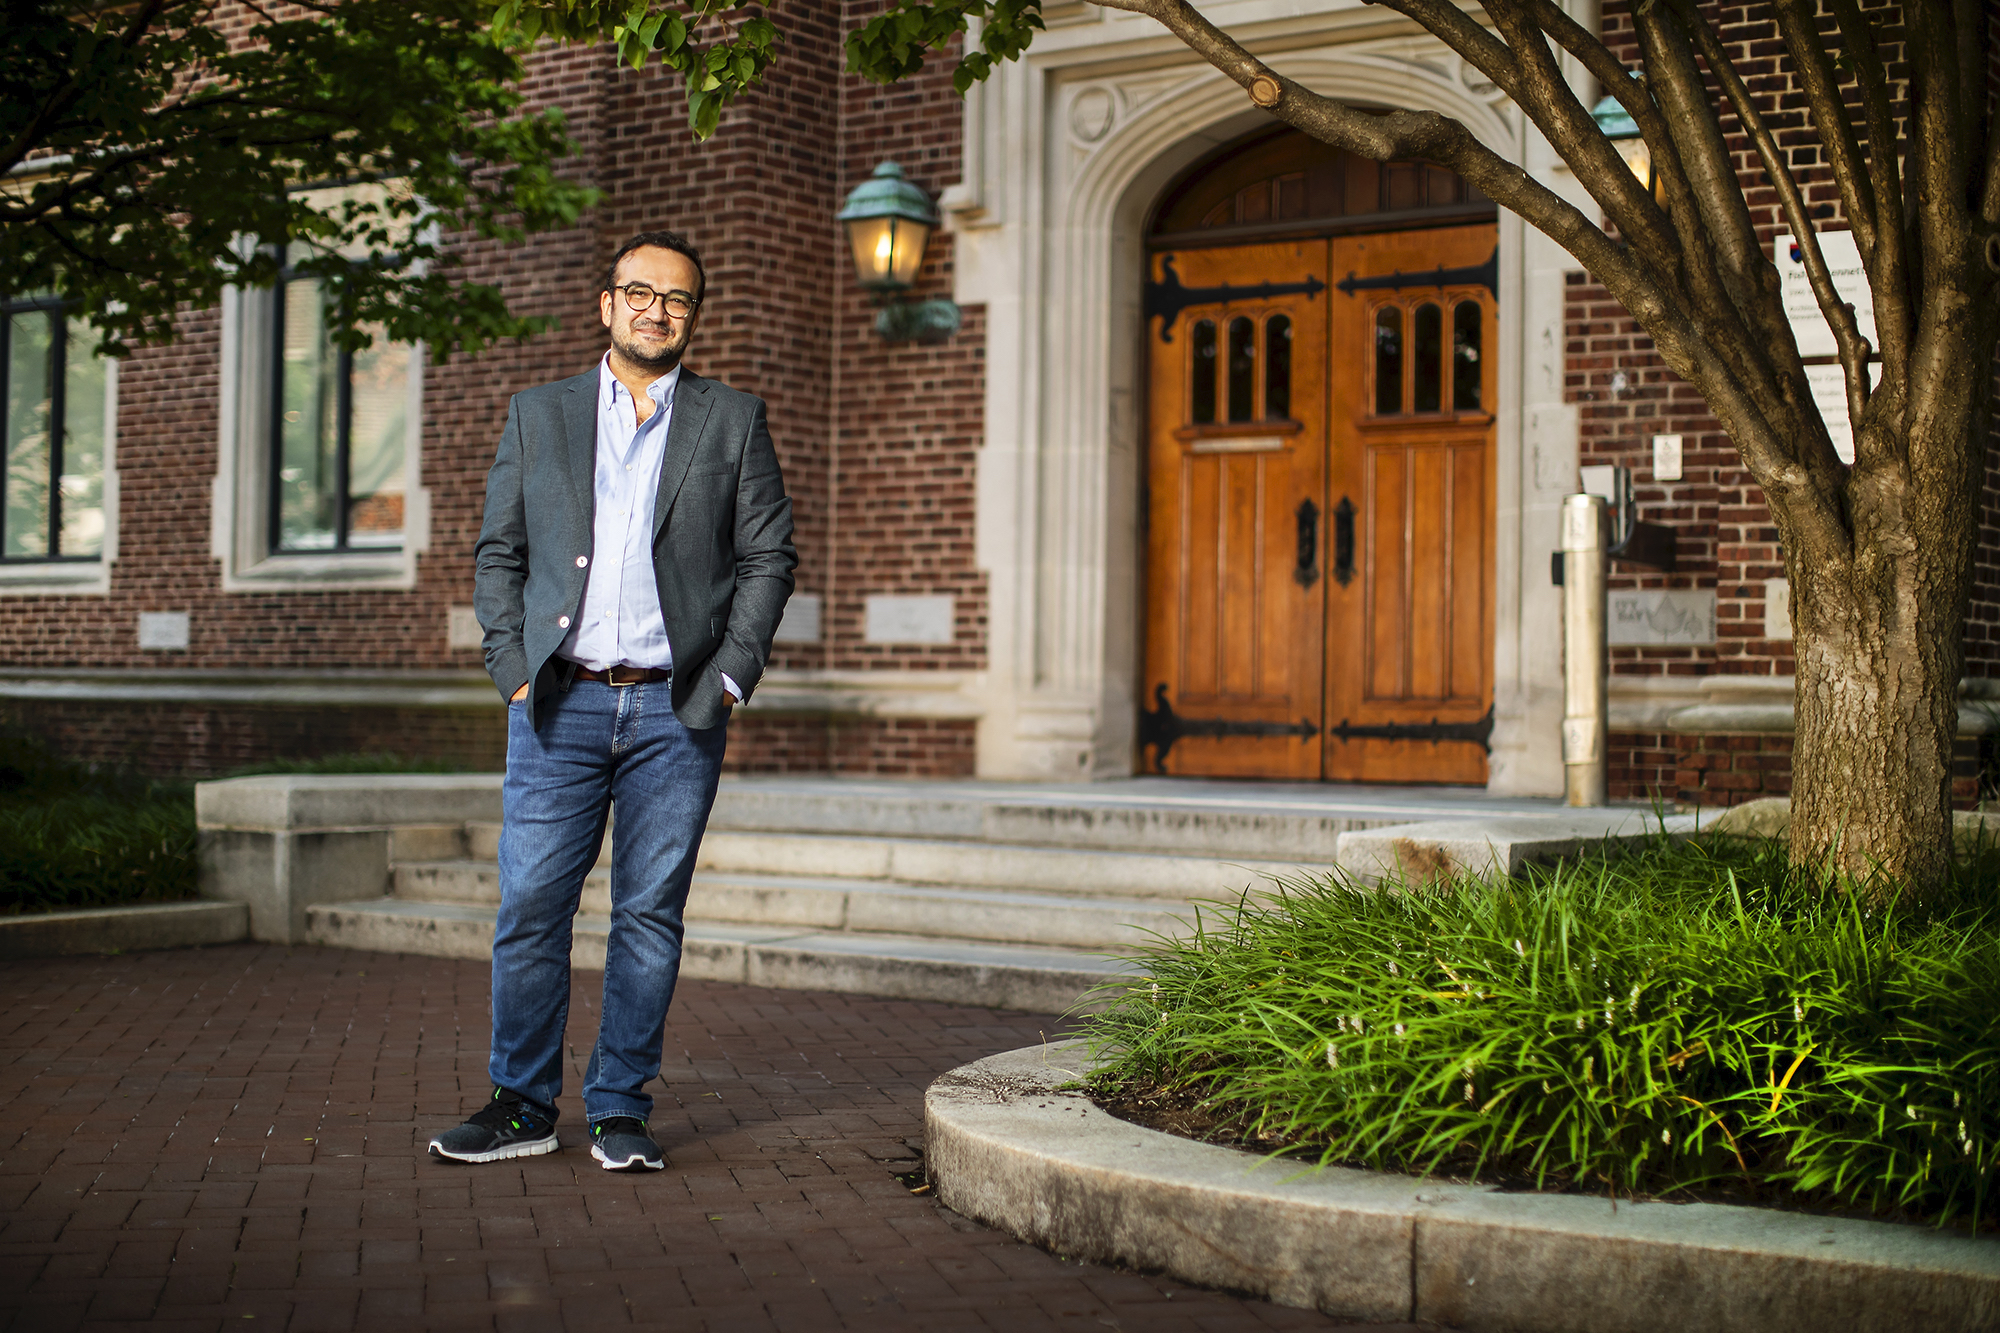 Hasan Küçük stands with his hands in his jeans pockets in front of the wooden double doors and red brick facade of  Fisher-Bennett Hall